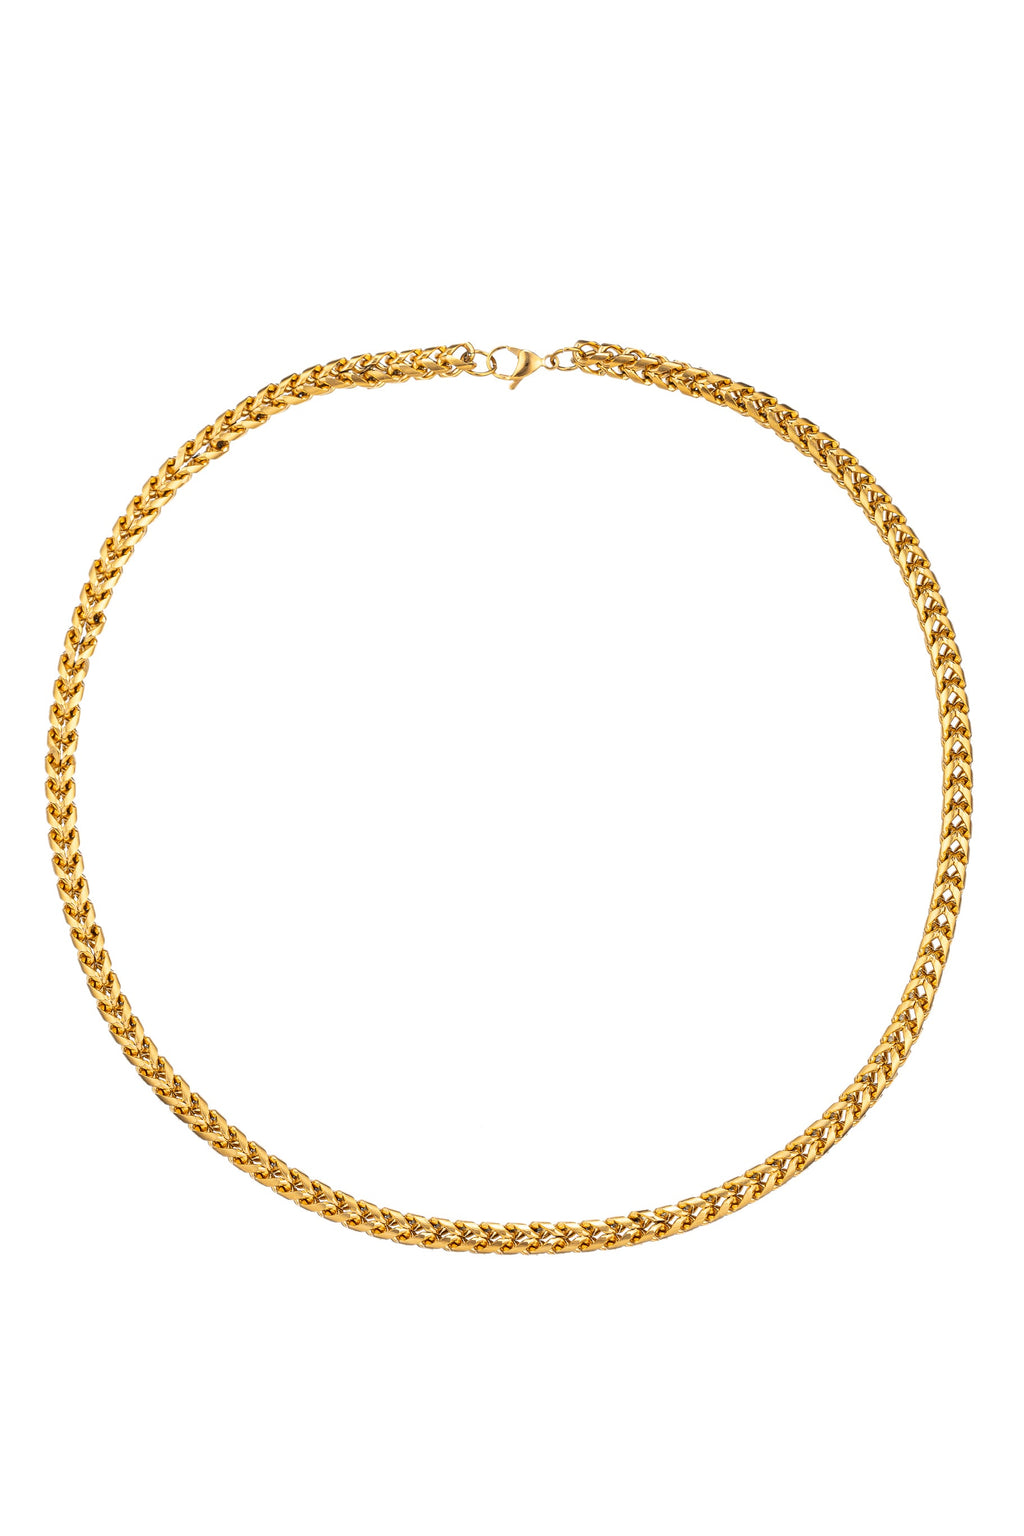 Leo Chain Link Necklace: A Bold and Stylish Statement Piece.